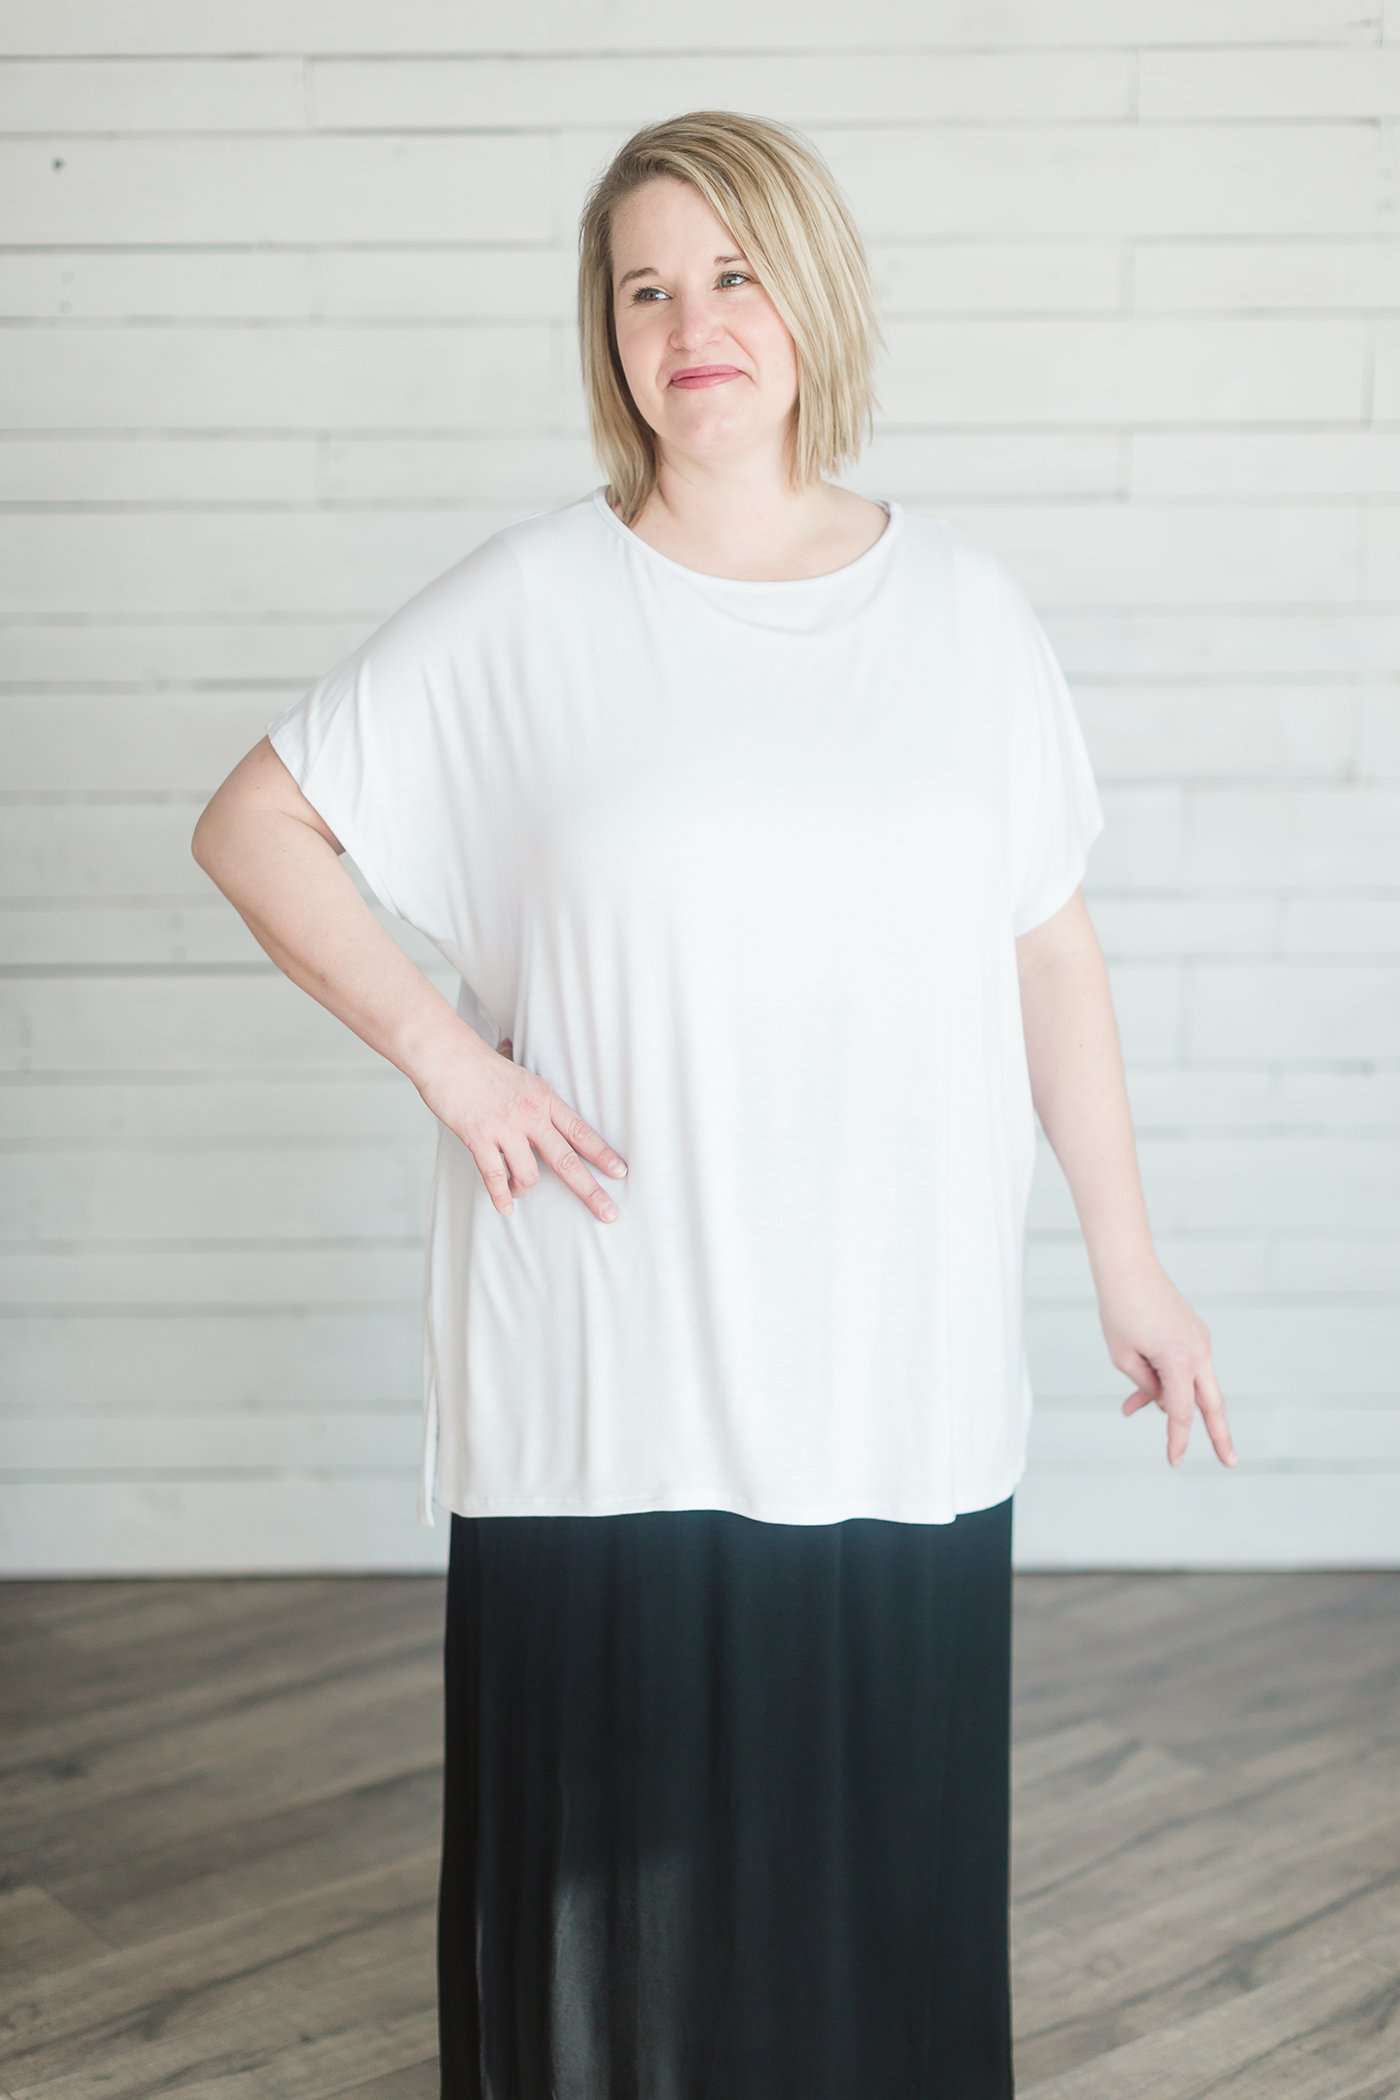 Relaxed Fit Drape Tee - FINAL SALE FF Tops